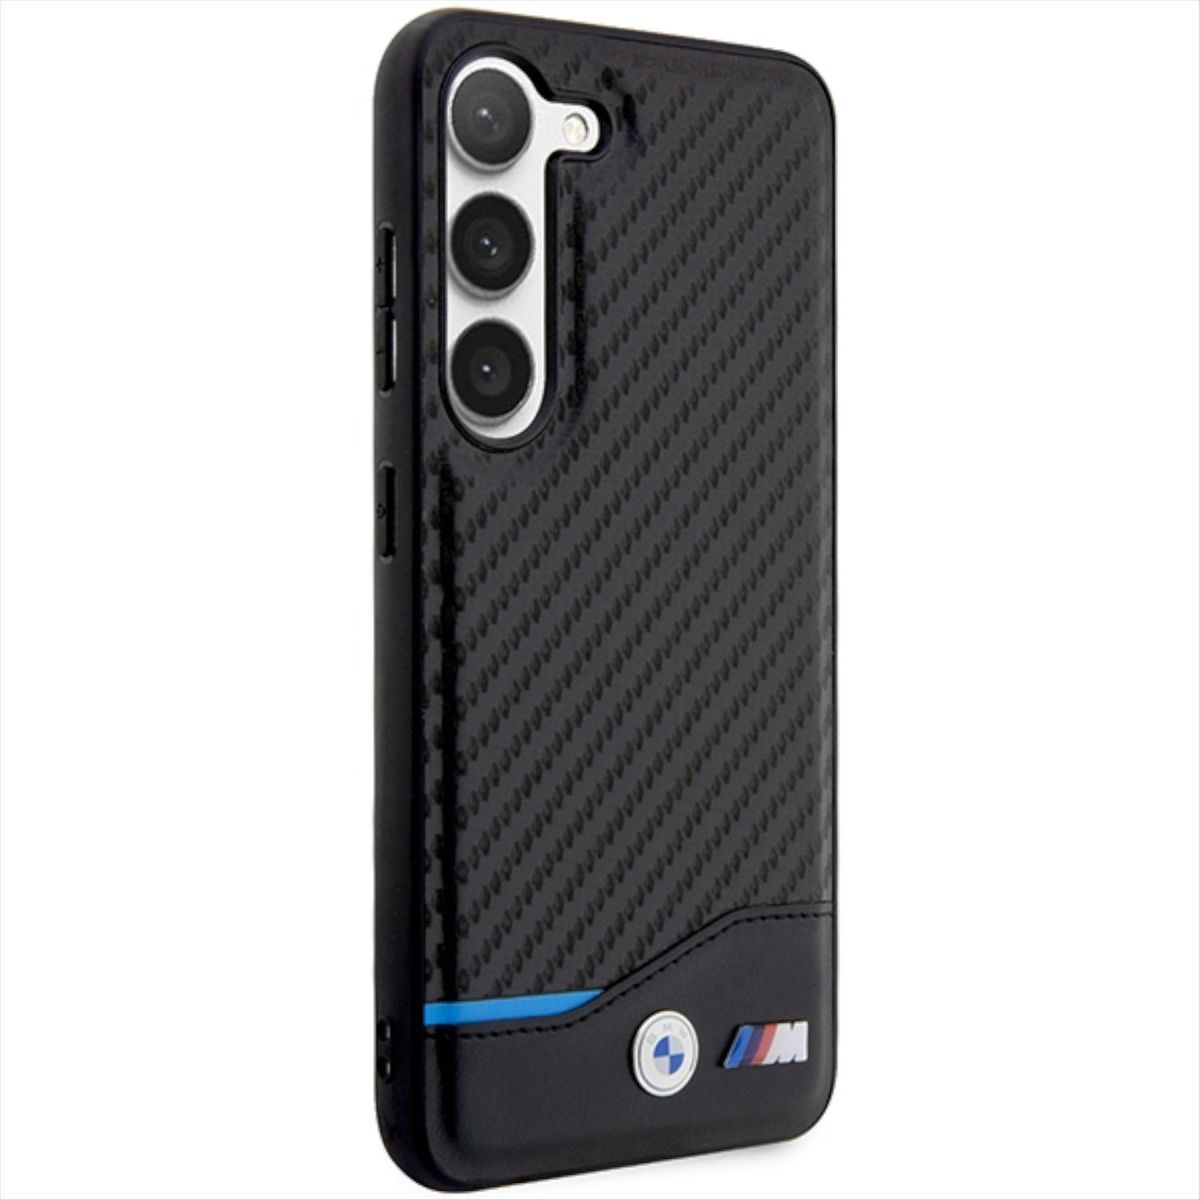 Backcover, BMW Design Samsung, Carbon Cover, Plus, Schwarz S23 Leather Galaxy